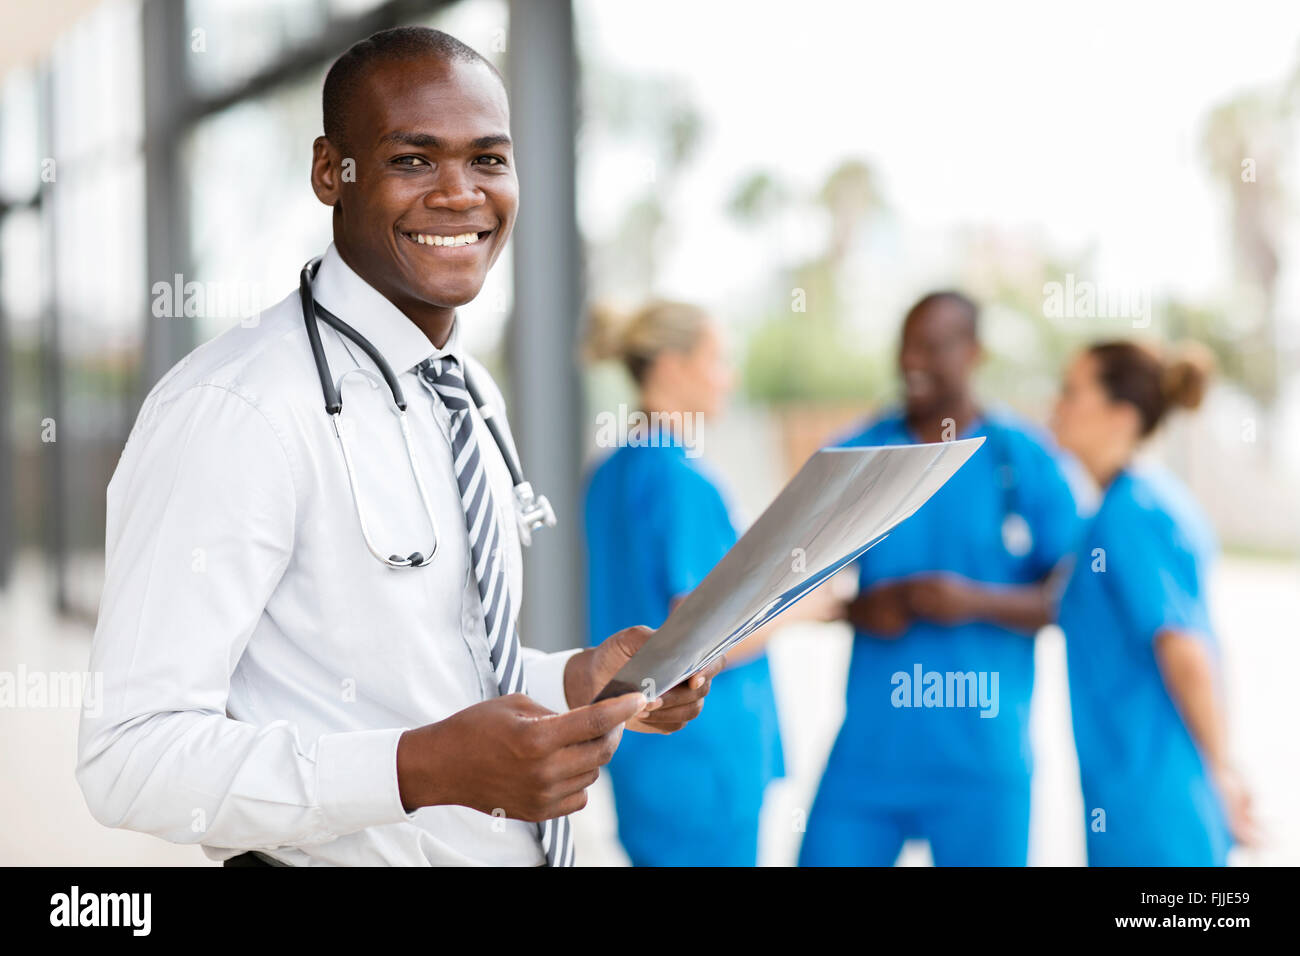 portrait of young African hospital doctor holding patient's x-ray Stock Photo